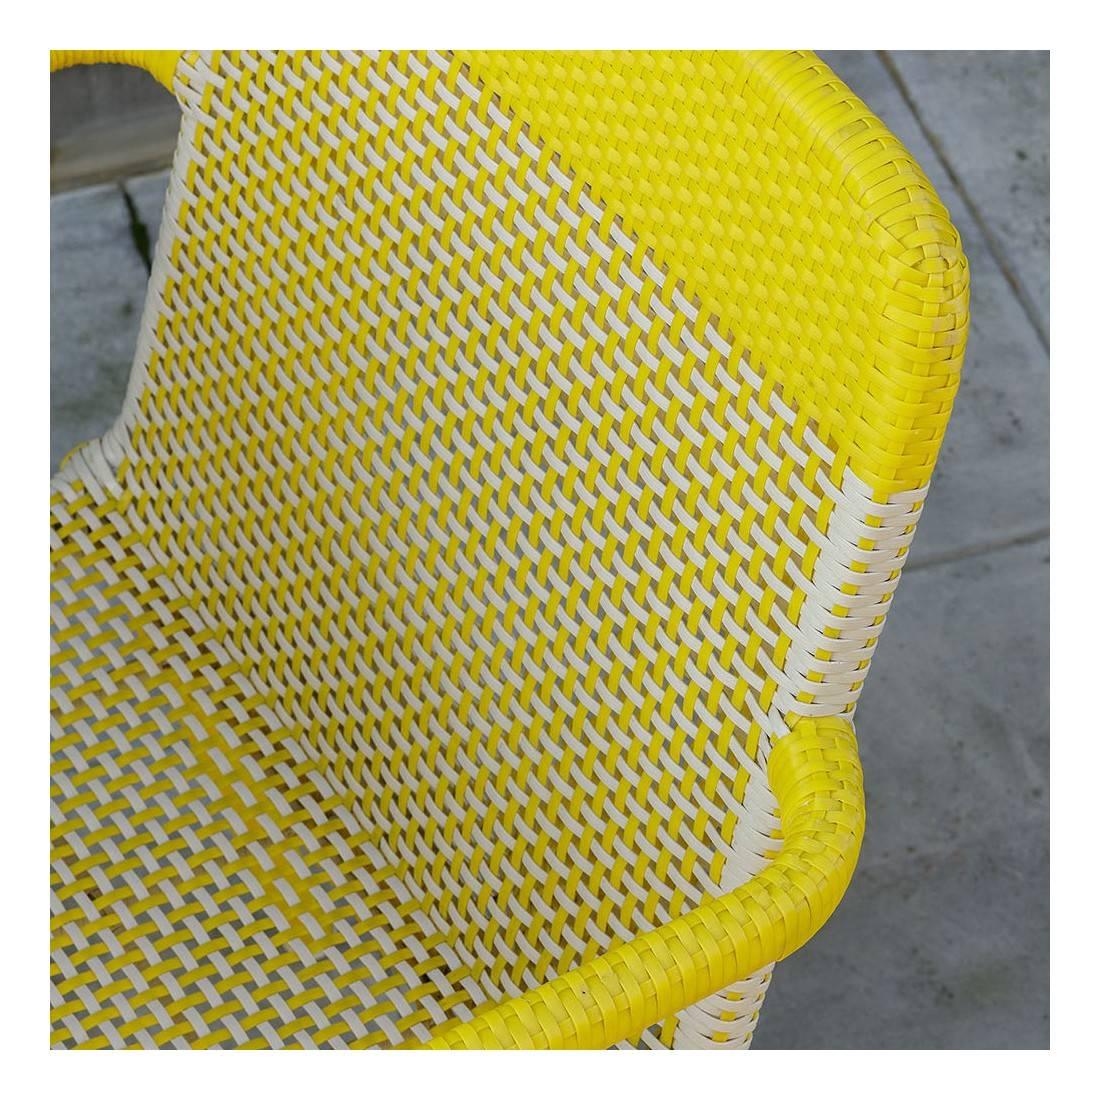 Set of six yellow and warm white braided resin armchairs indoor/outdoor. They will be perfect on your terrace, in your veranda, your winter garden, even around the dining table! Design, retro style, practical (stackable !) never used.